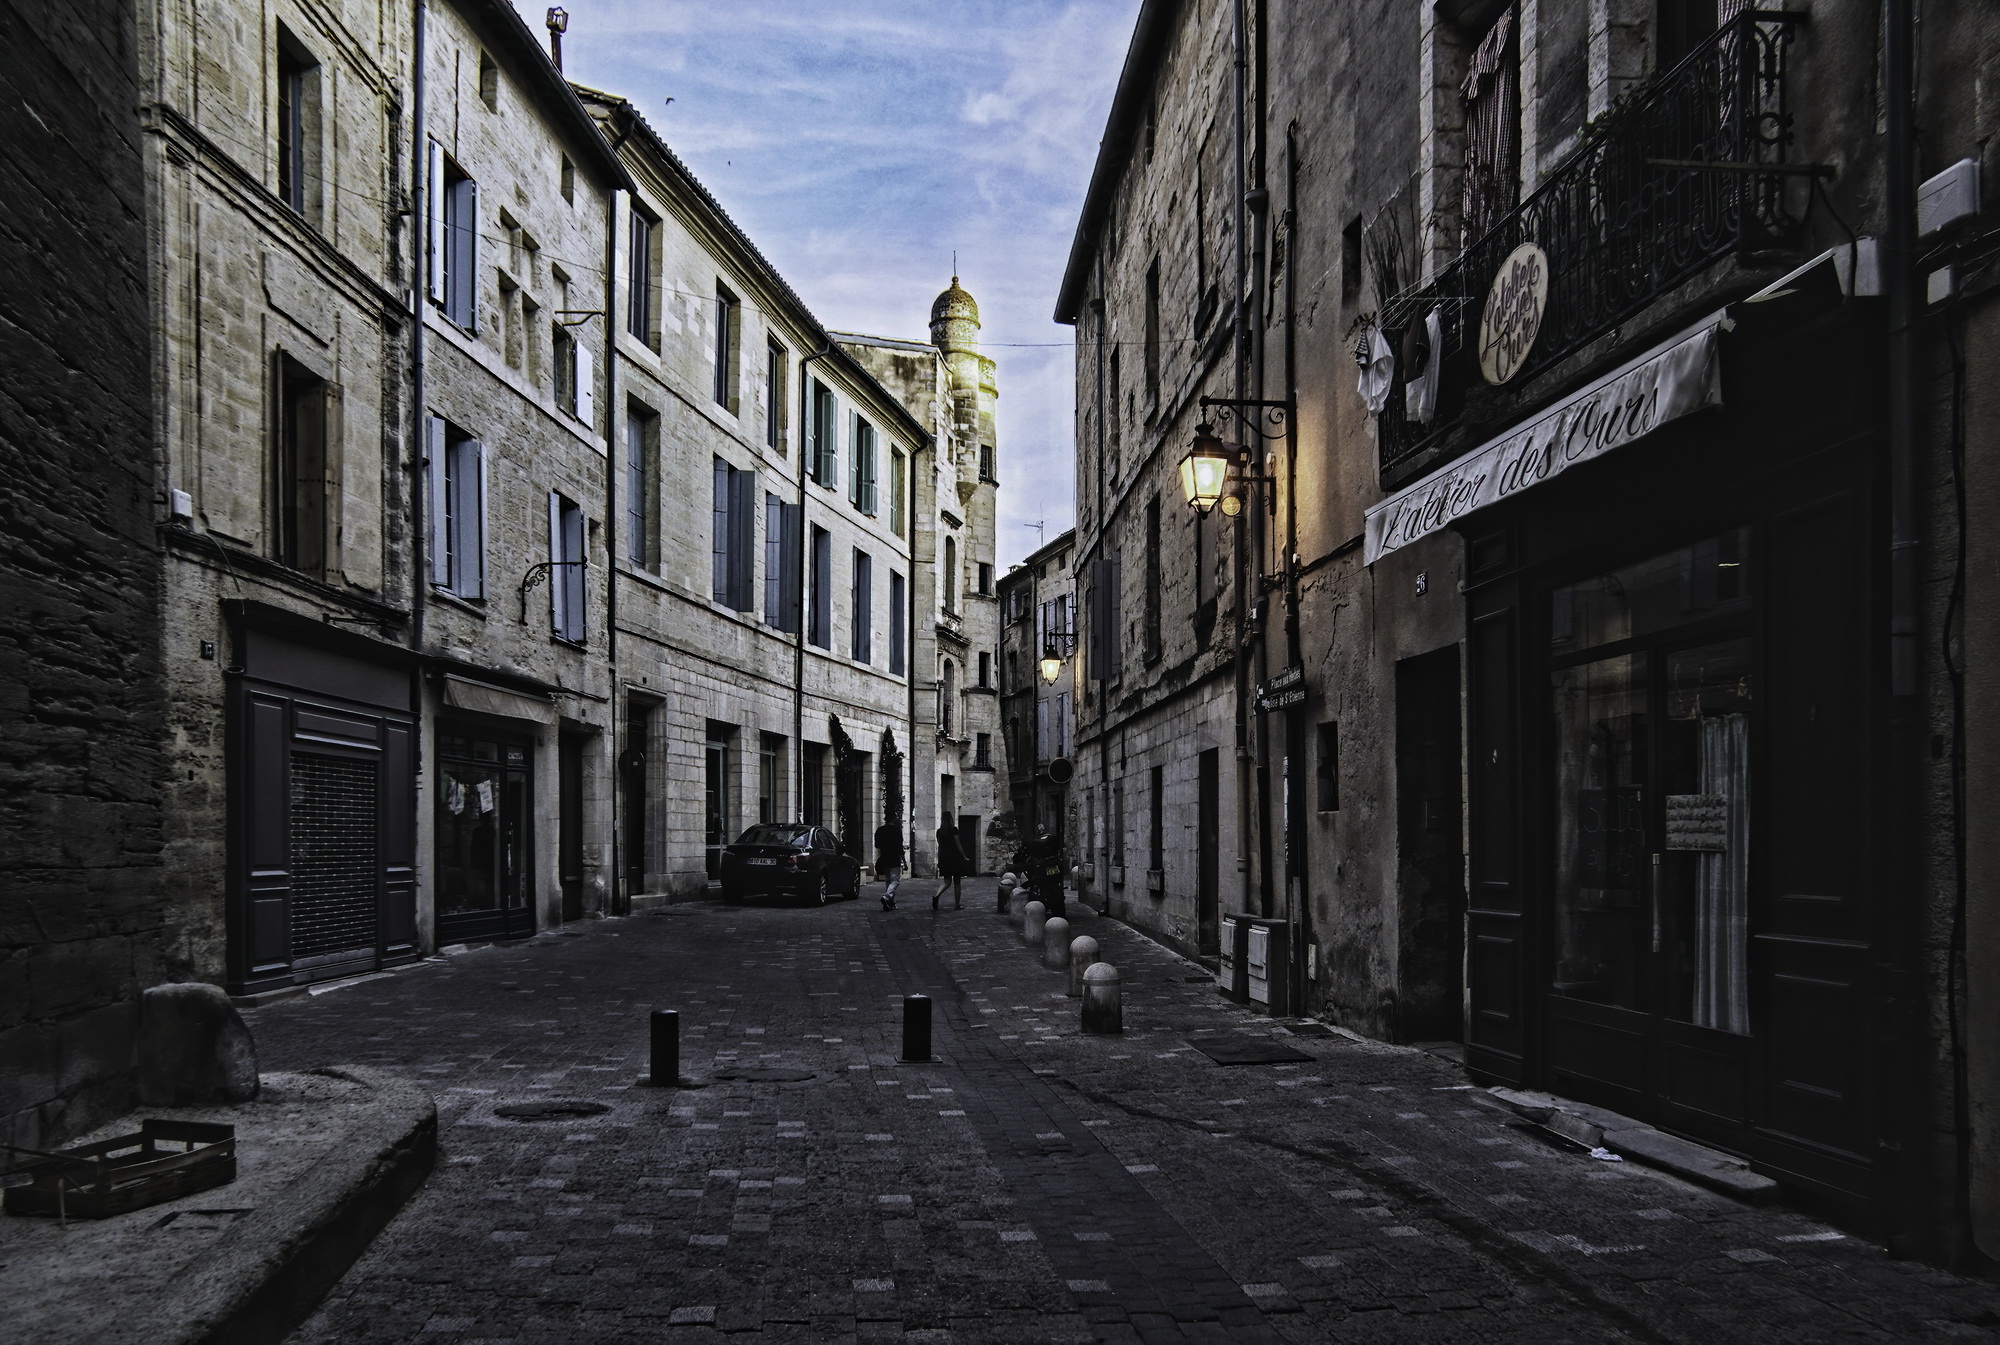 Late afternoon in Uzes, France...